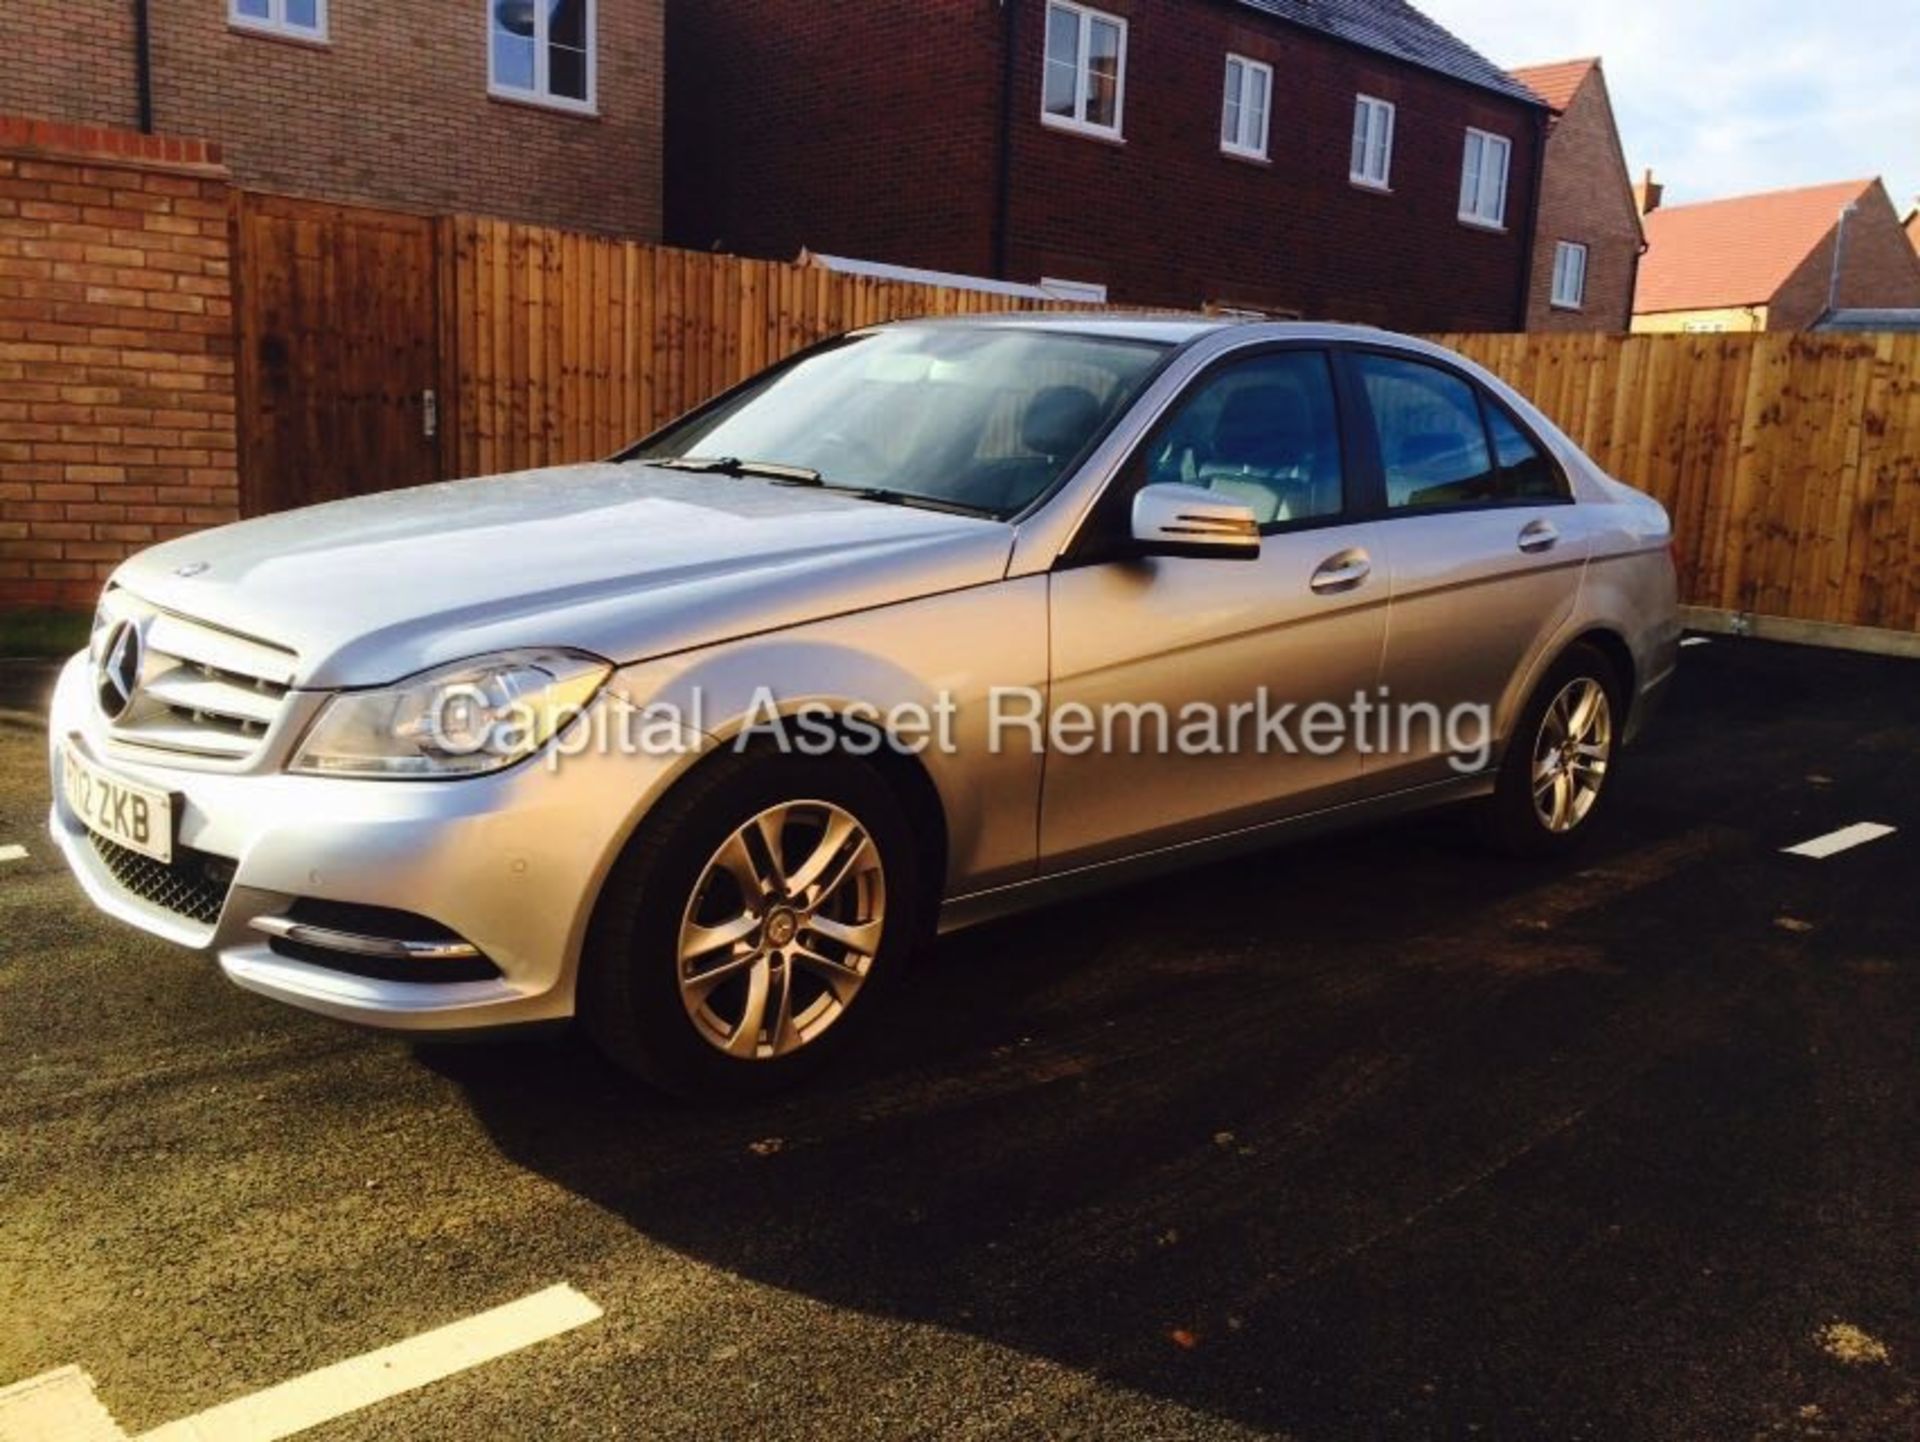 ON SALE MERCEDES C220CDI "EXECUTIVE SE" BLUE EFFINCY ECO (2012 -12 REG) 1 OWNER FROM NEW - LEATHER - Image 3 of 16